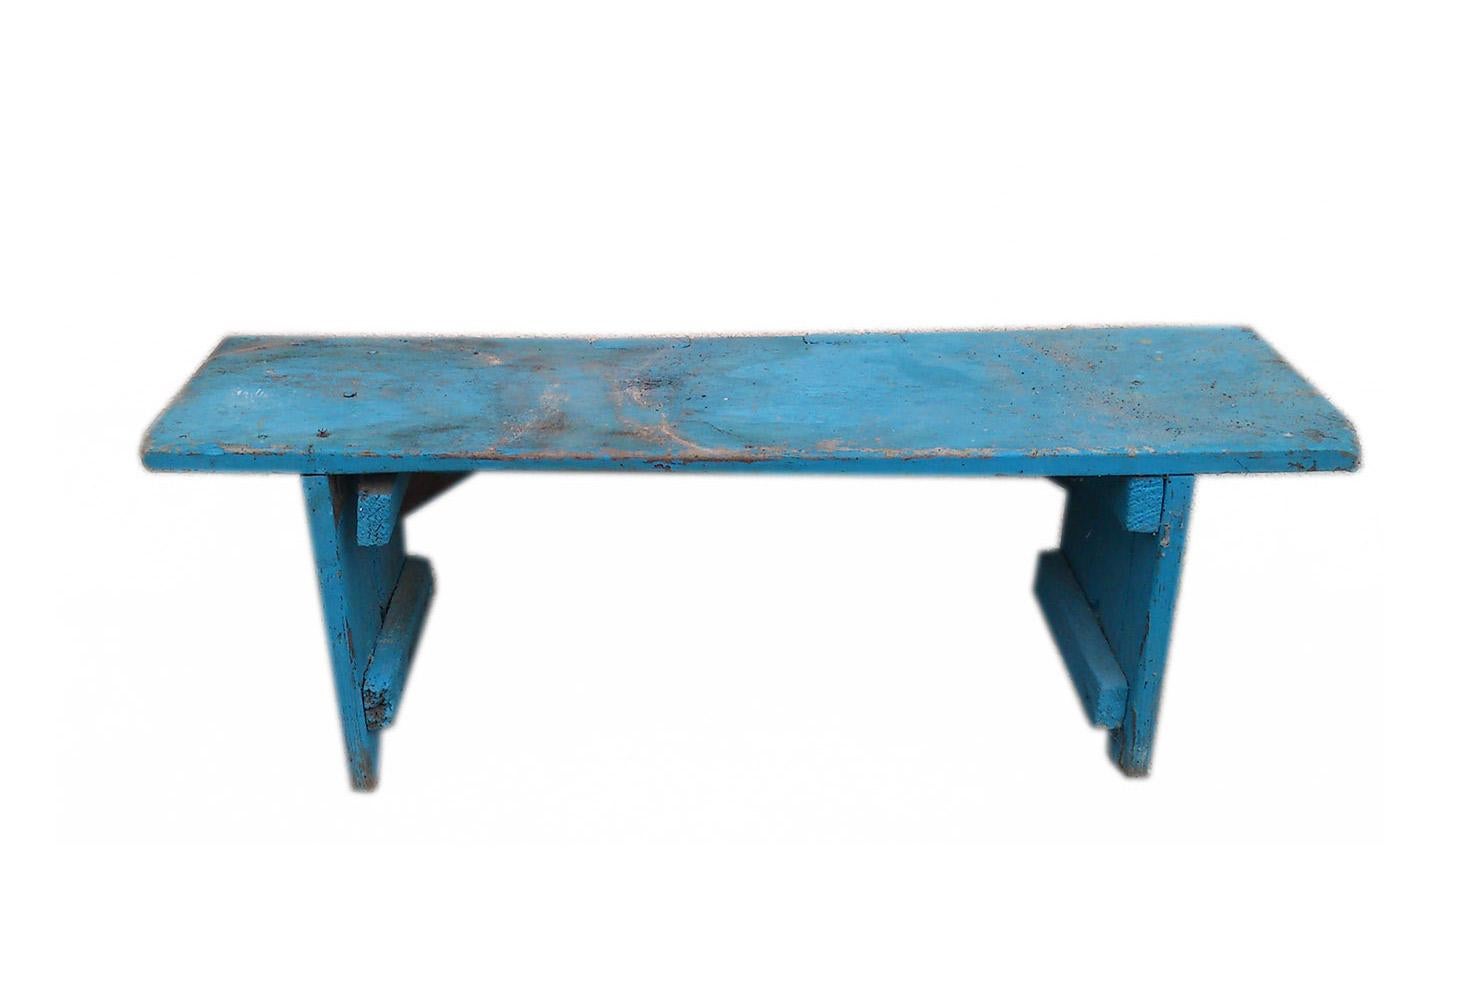 Original seat bench. All original.
Small, country plank seat bench, with terrific wear from use to the stretchers, and with original paint, again with much wear.
 